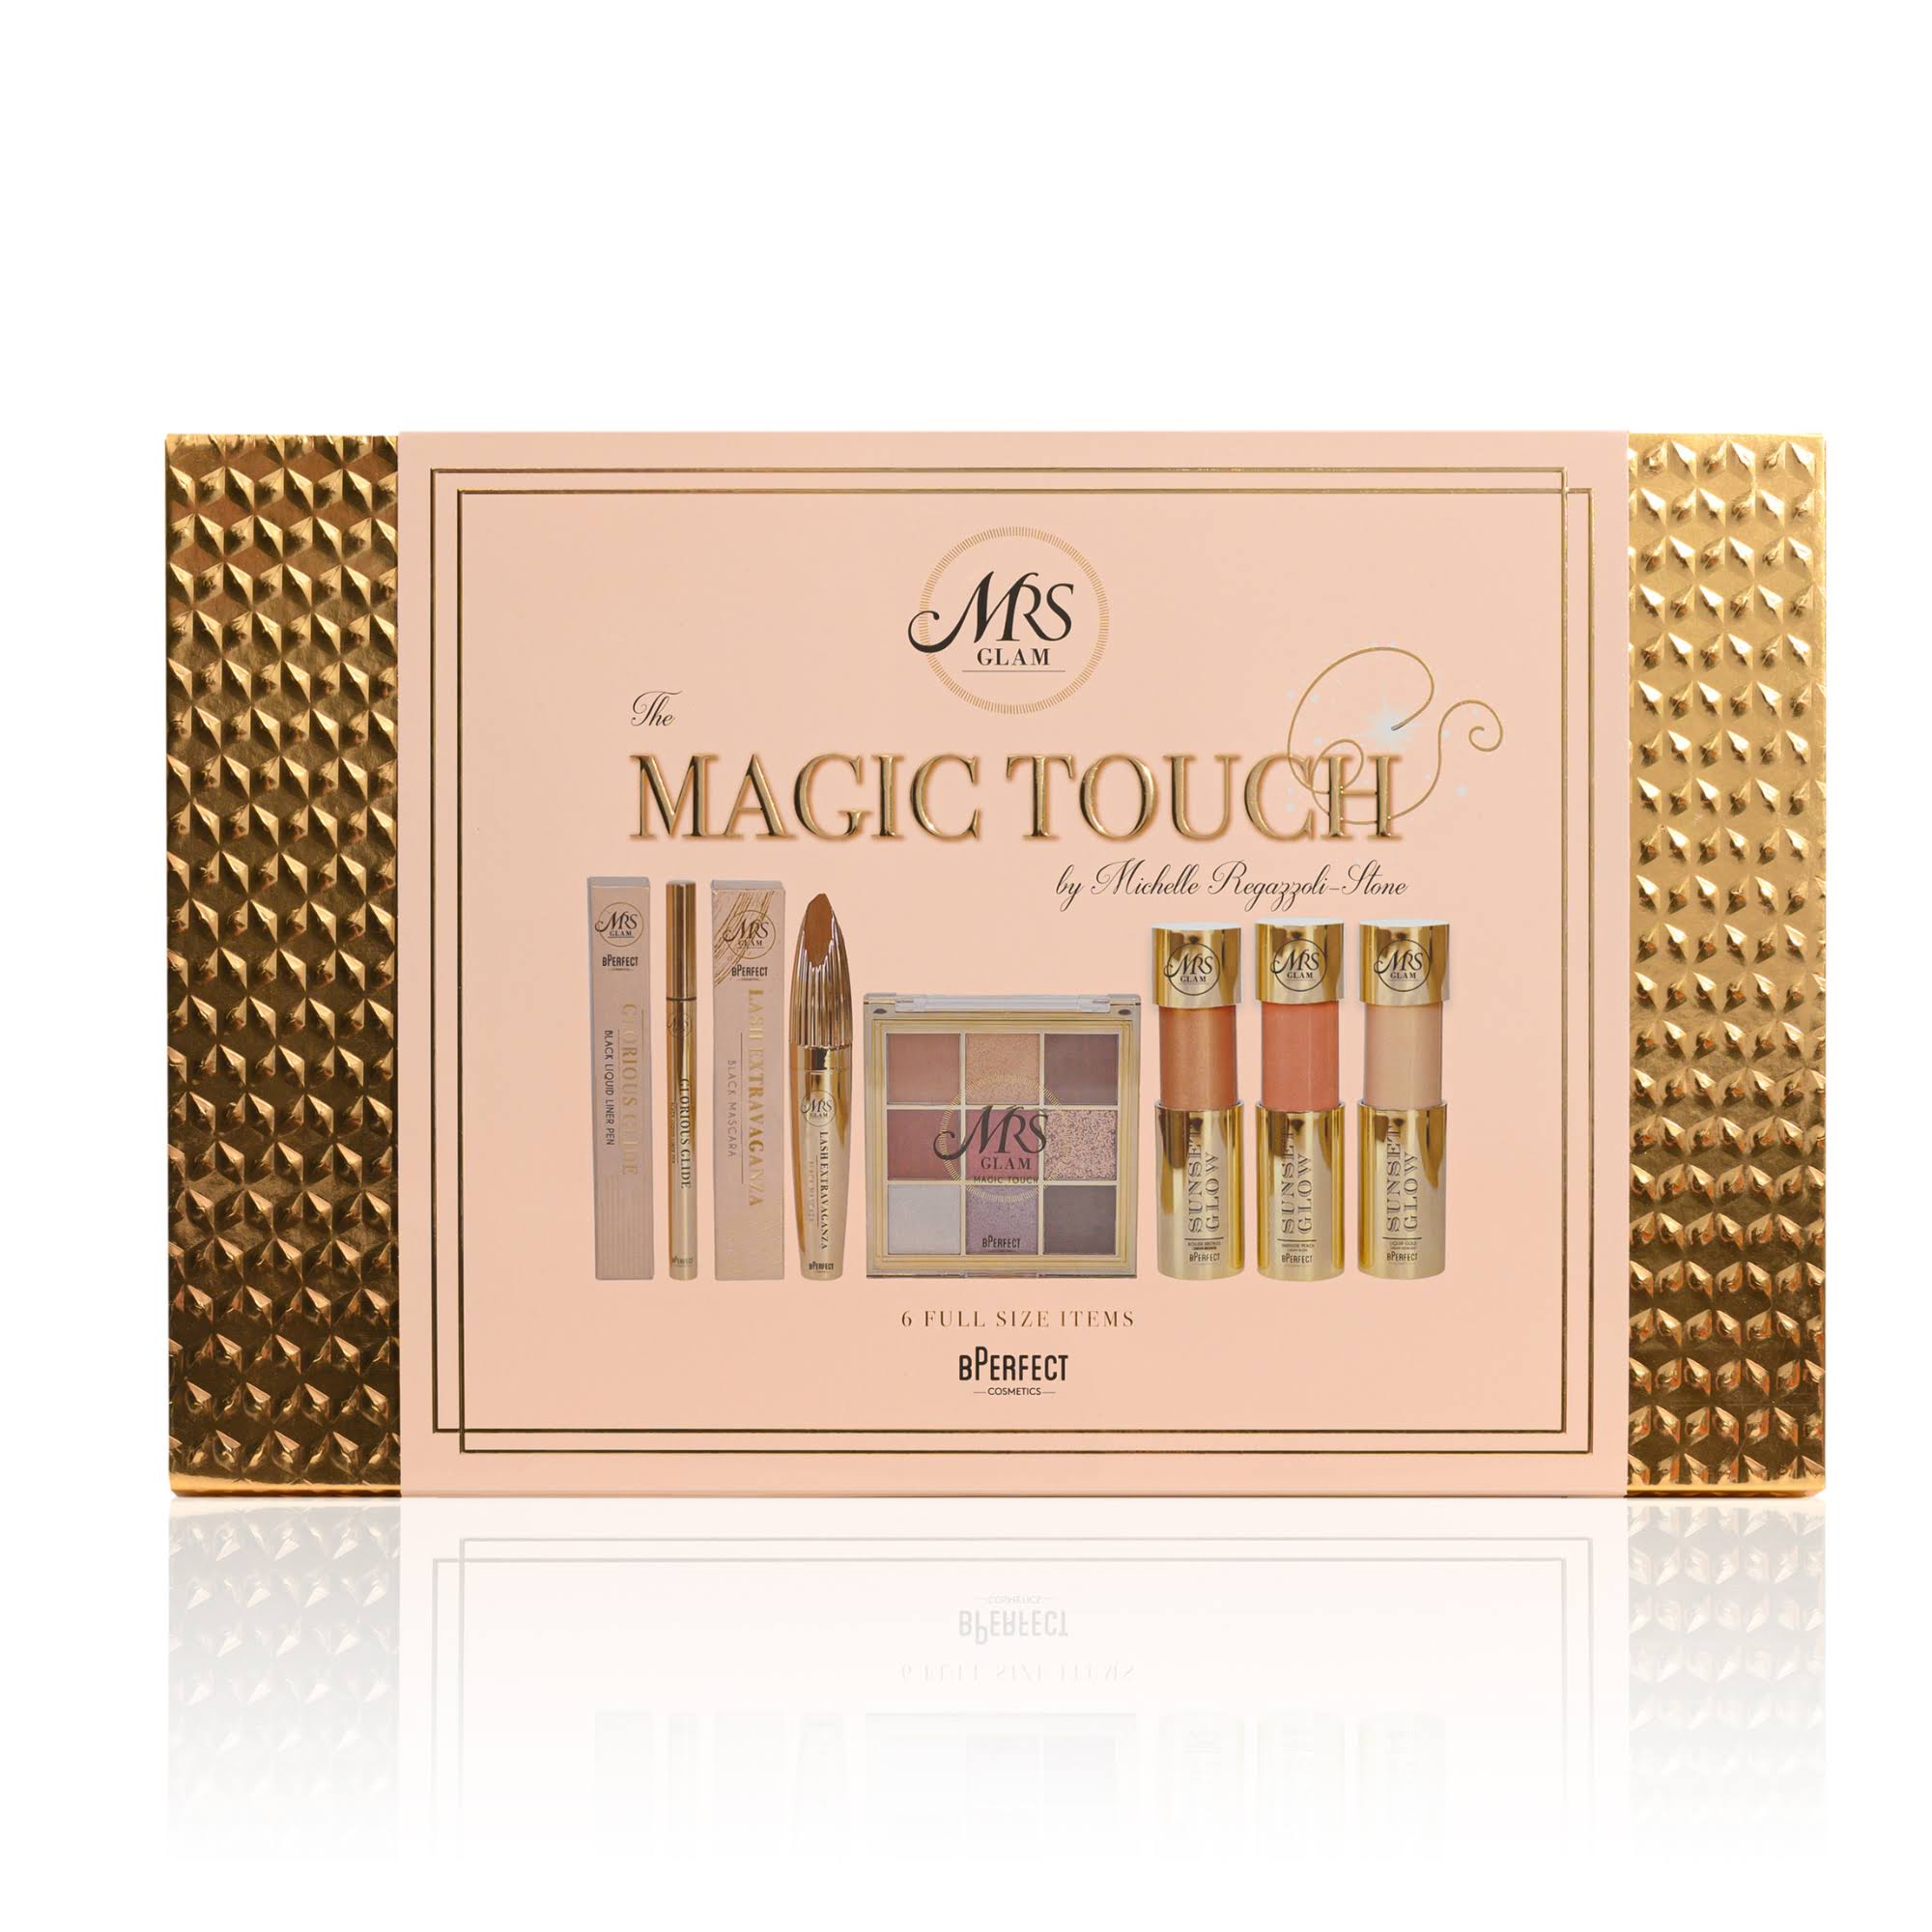 Mrs Glam - The Magic Touch Gift Set